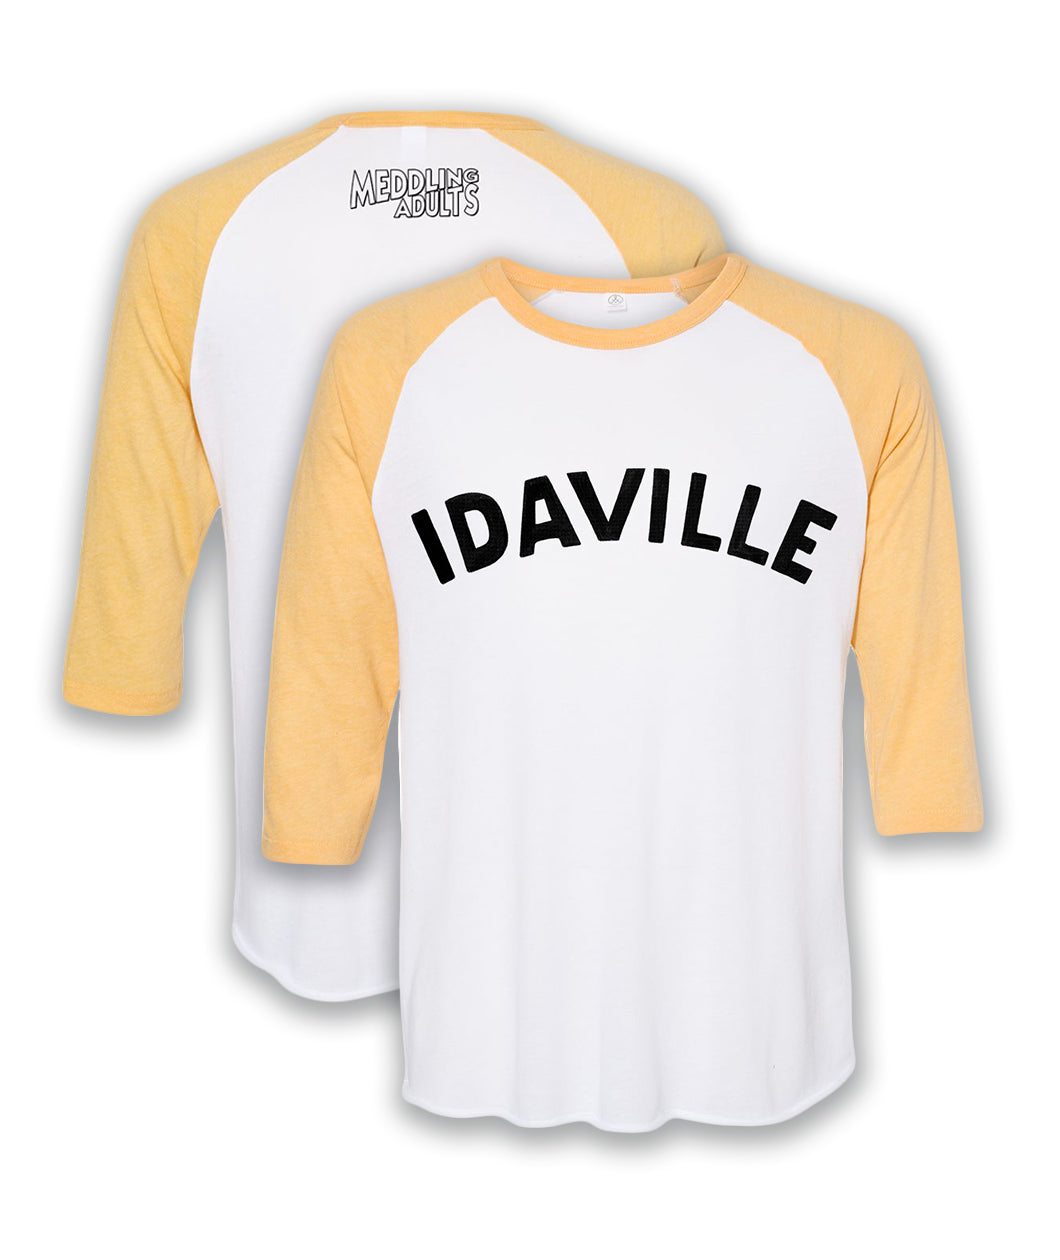 A white baseball tee with light yellow sleeve and trim. Across the front reads 